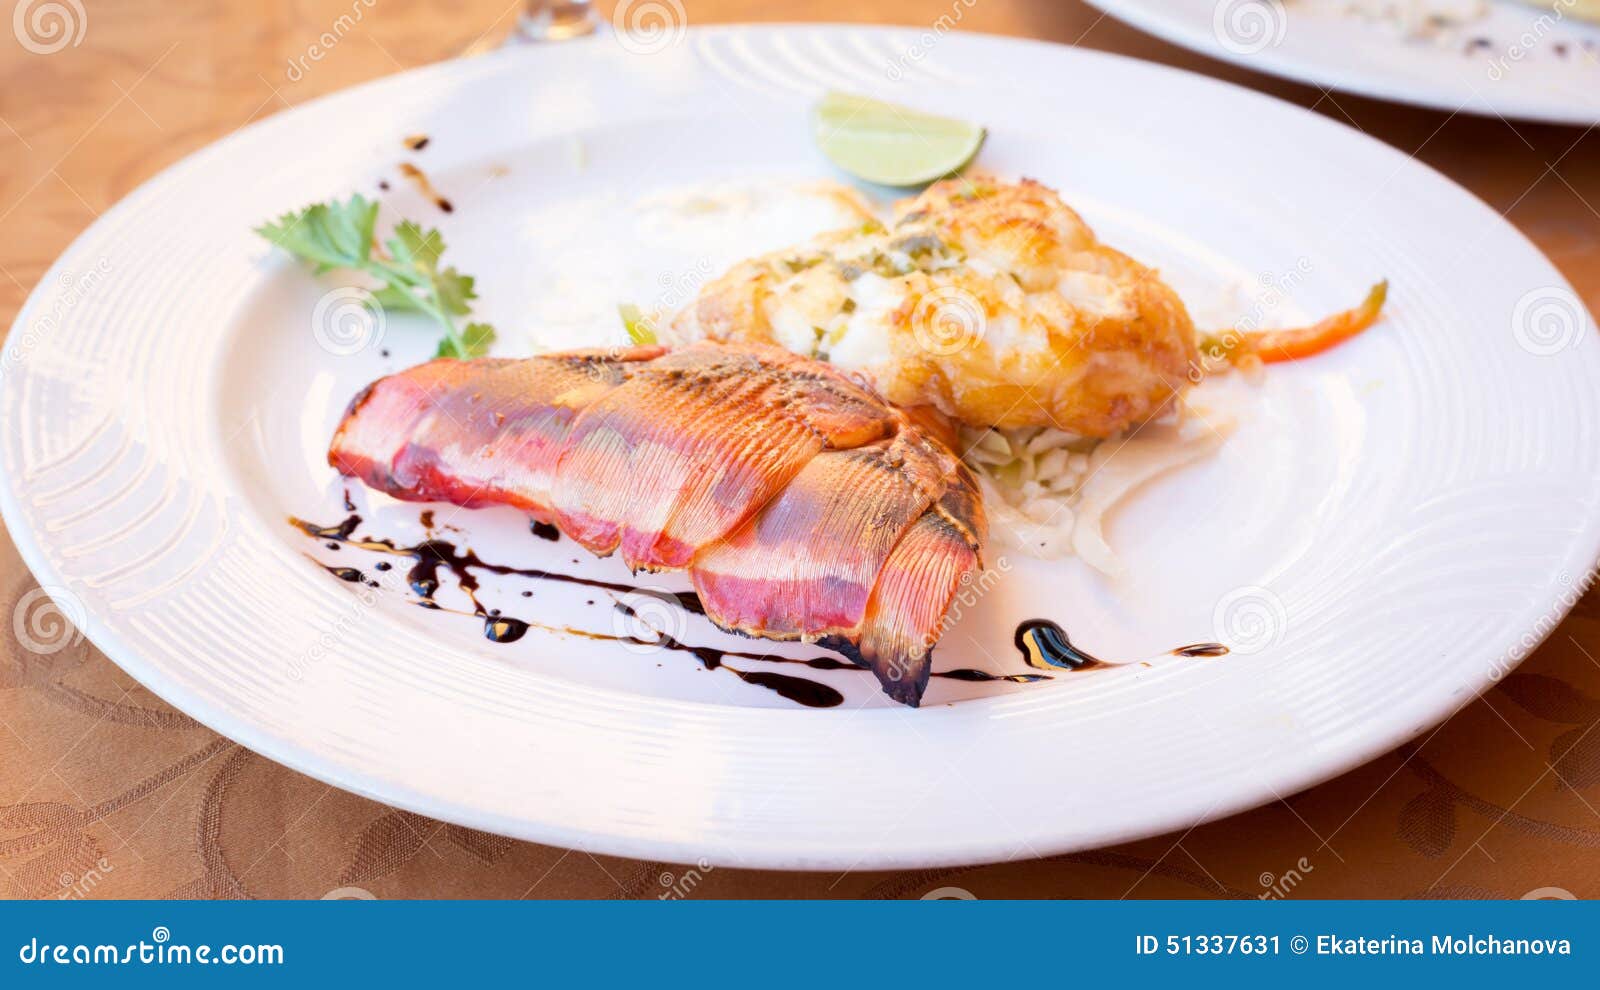 Fried Lobster In A Restaurant Stock Image - Image of ...